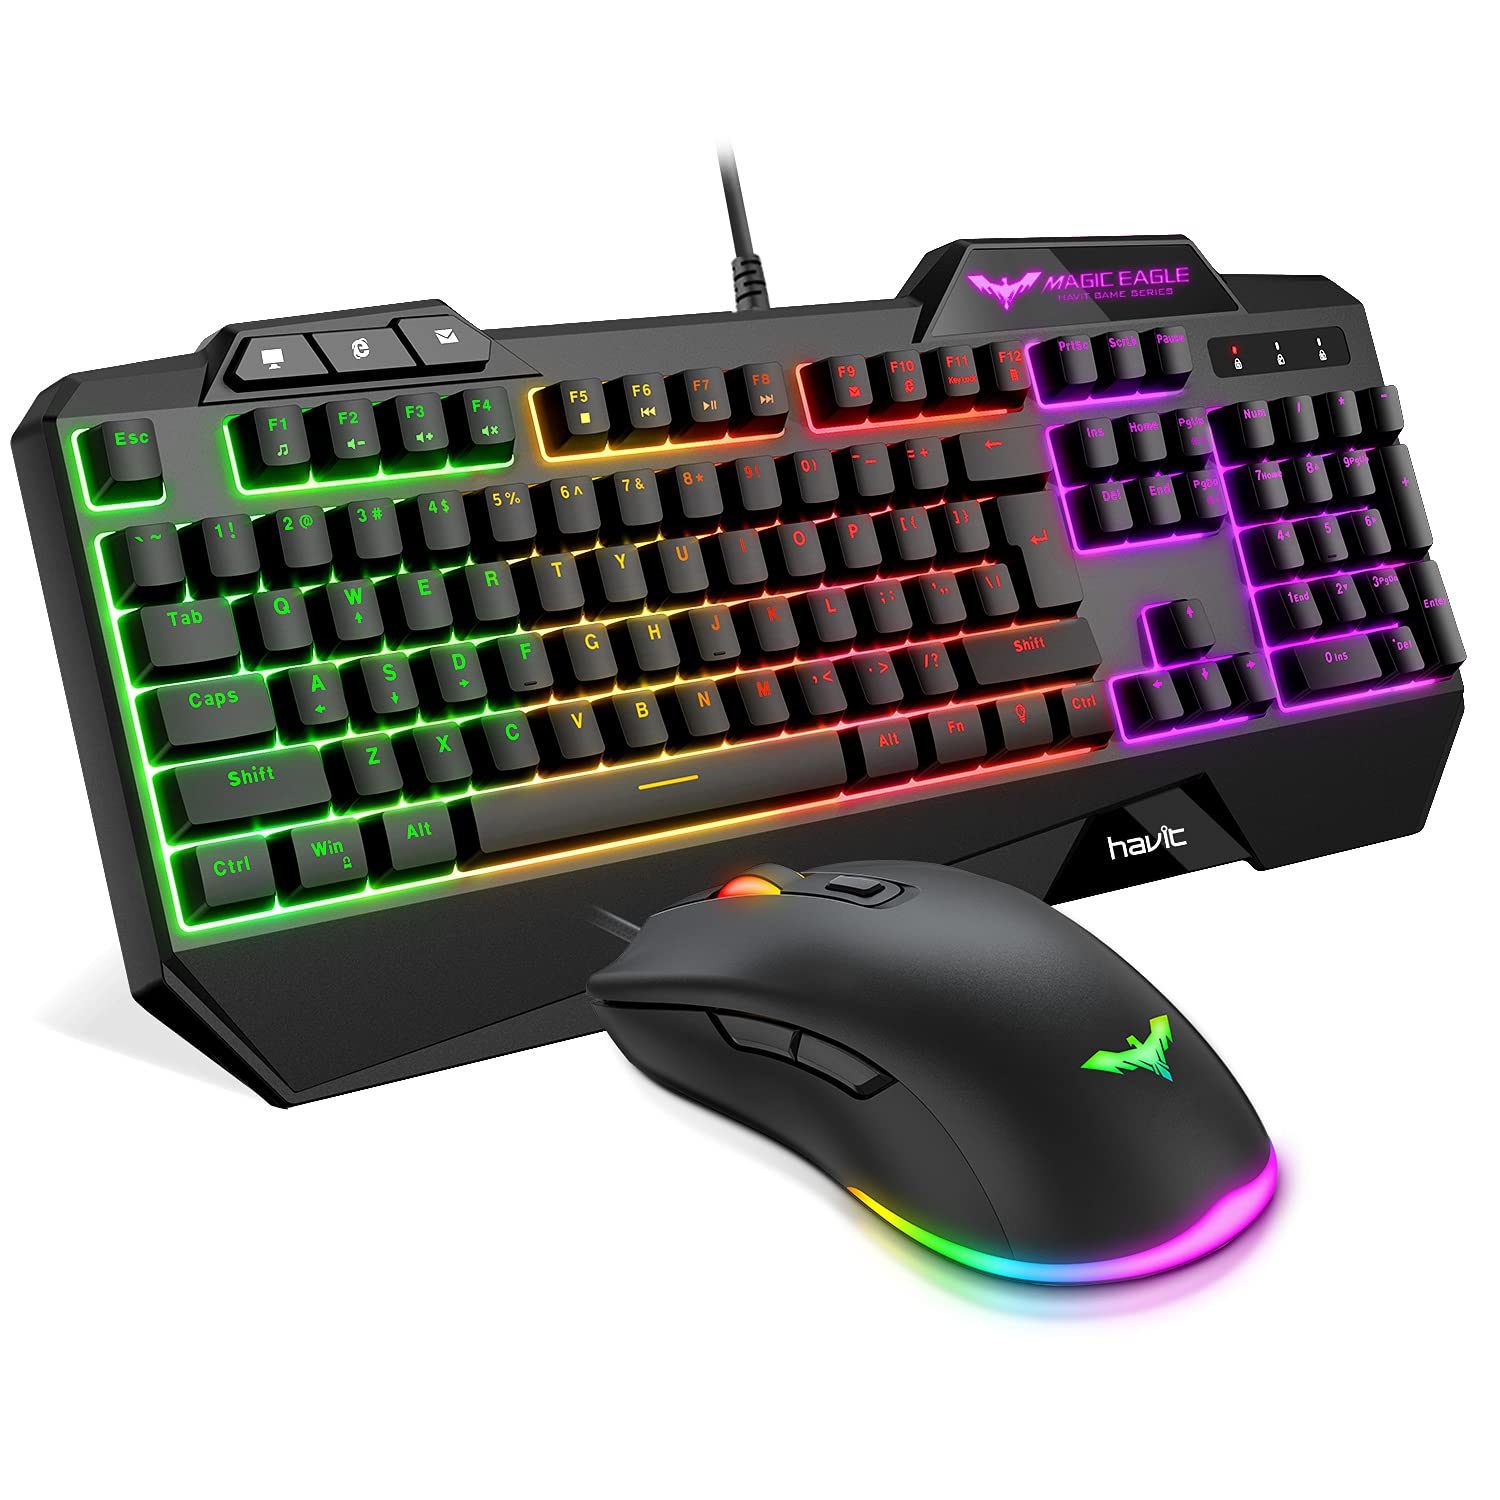 havit Gaming Keyboard Mouse Headset & Mouse Pad Kit, Rainbow LED Backlit Wired, Over Ear Headphone with Mic for PC Computer, Laptop and More